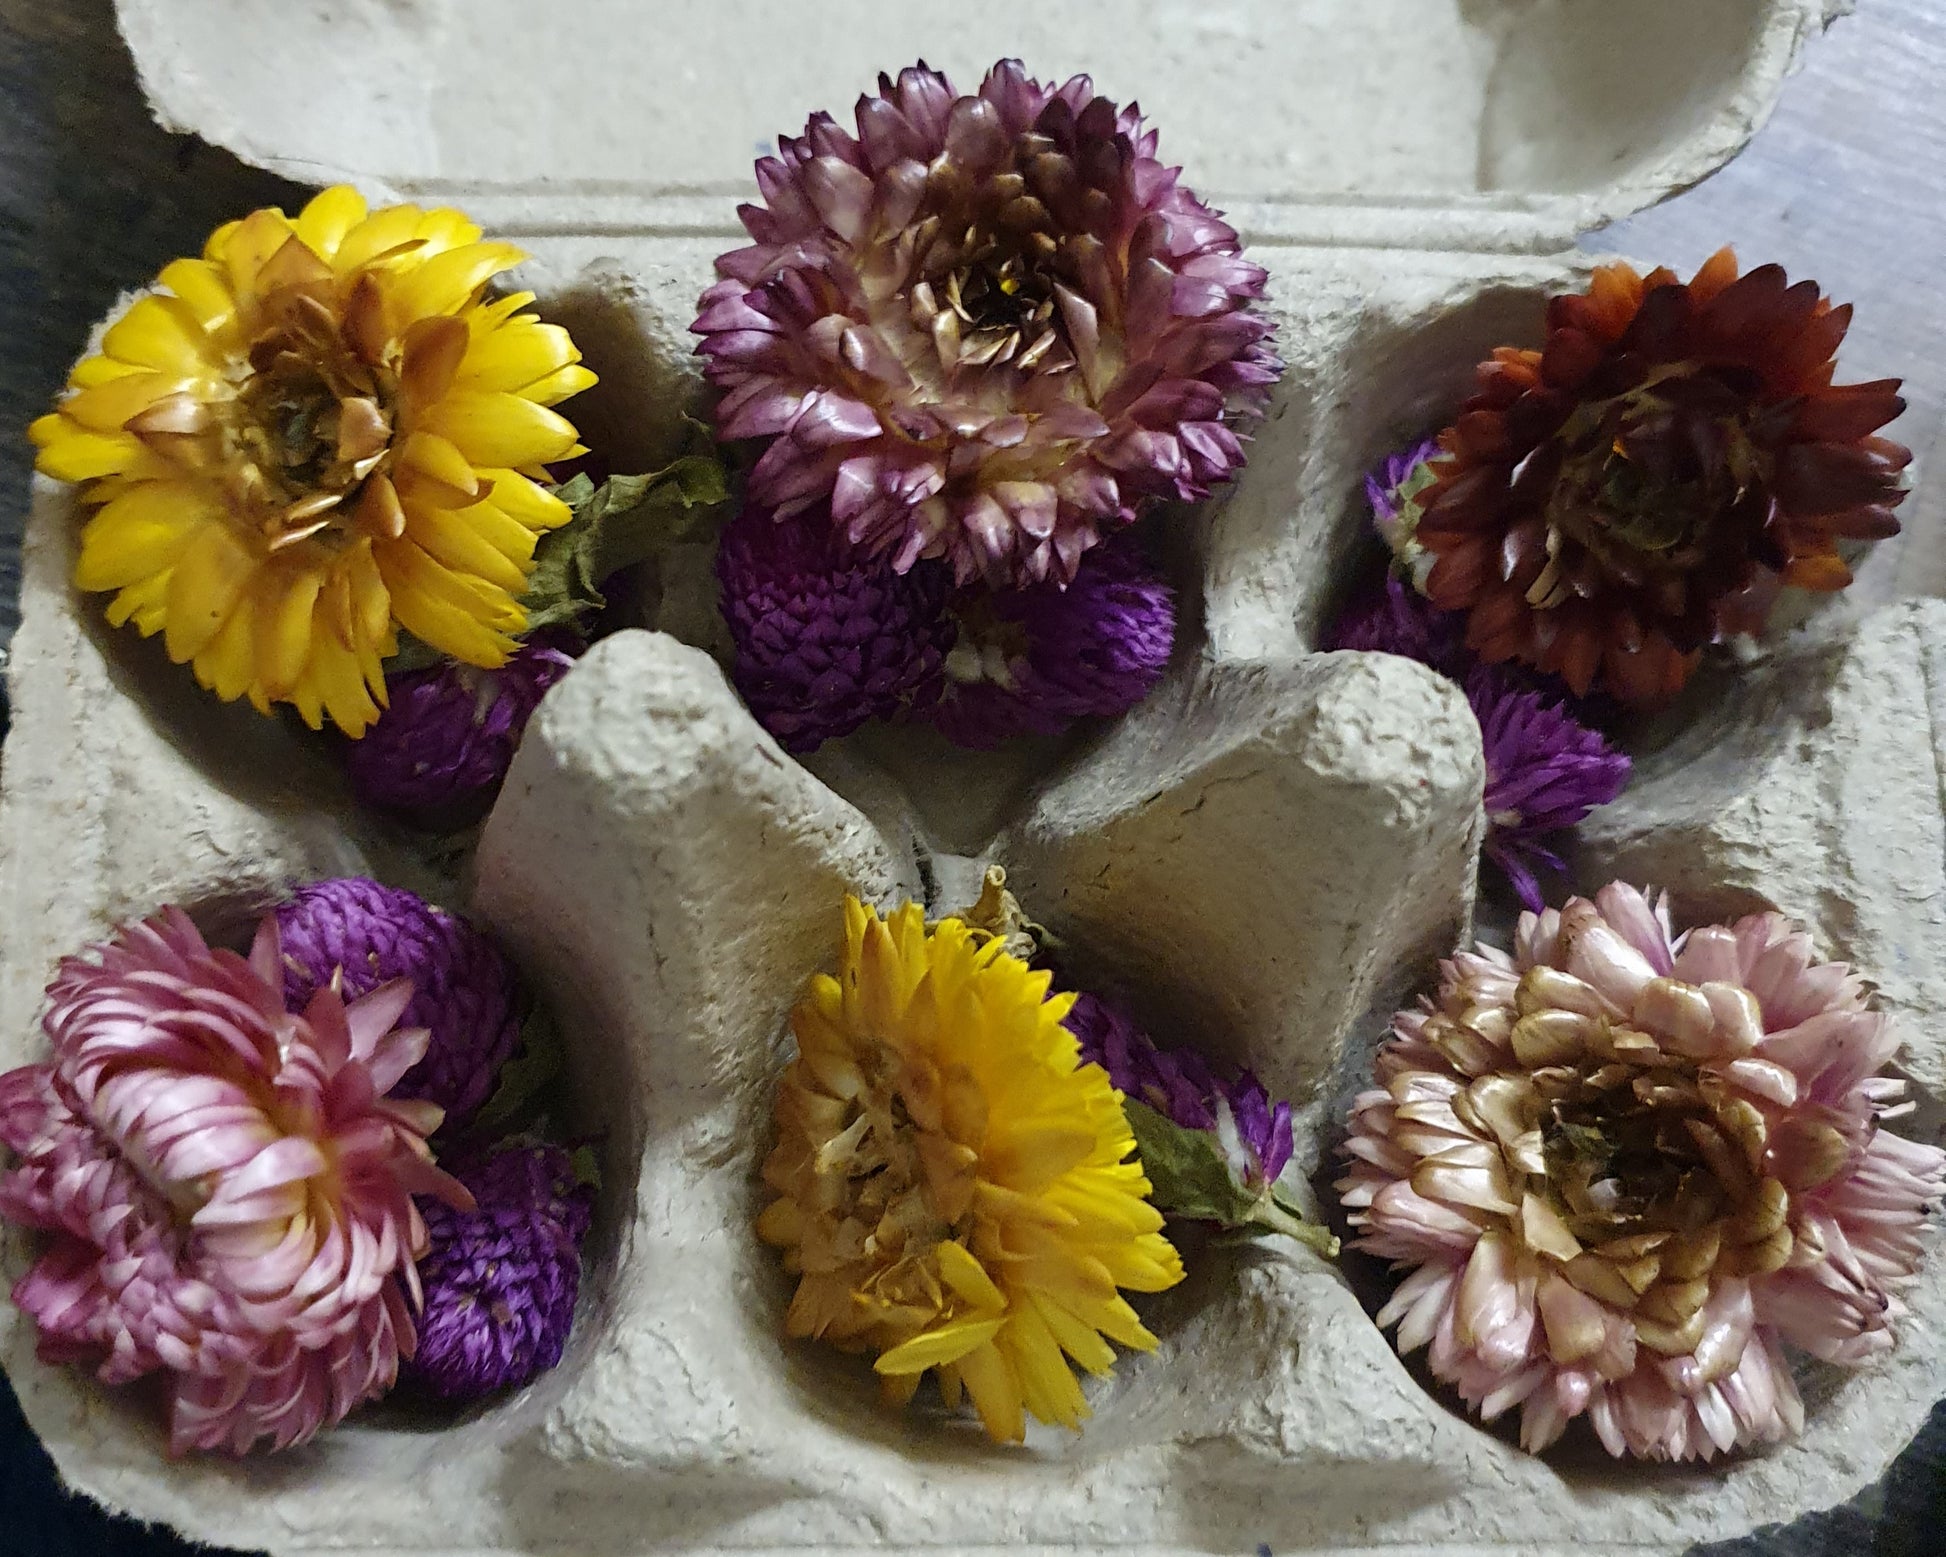 Chrysanthemum and Amaranth Dried Flowers - Keipach